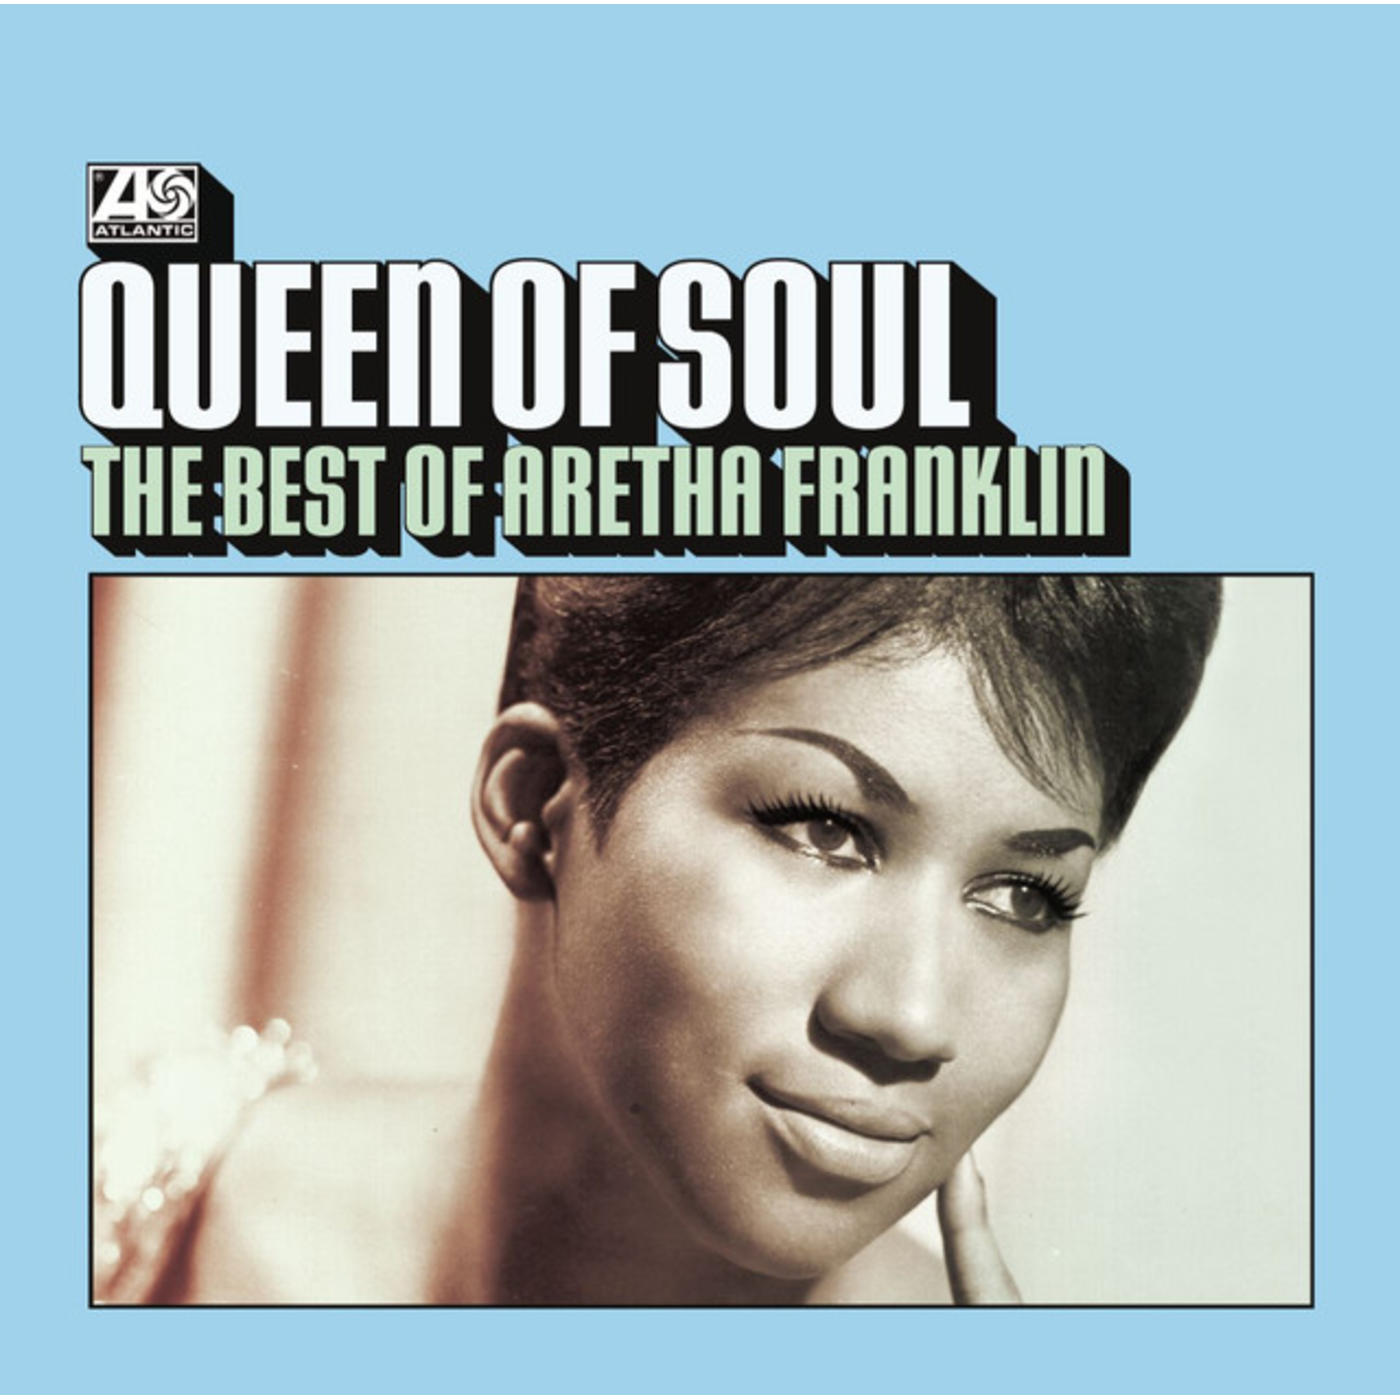 Queen Of Soul - The Best of Aretha Franklin